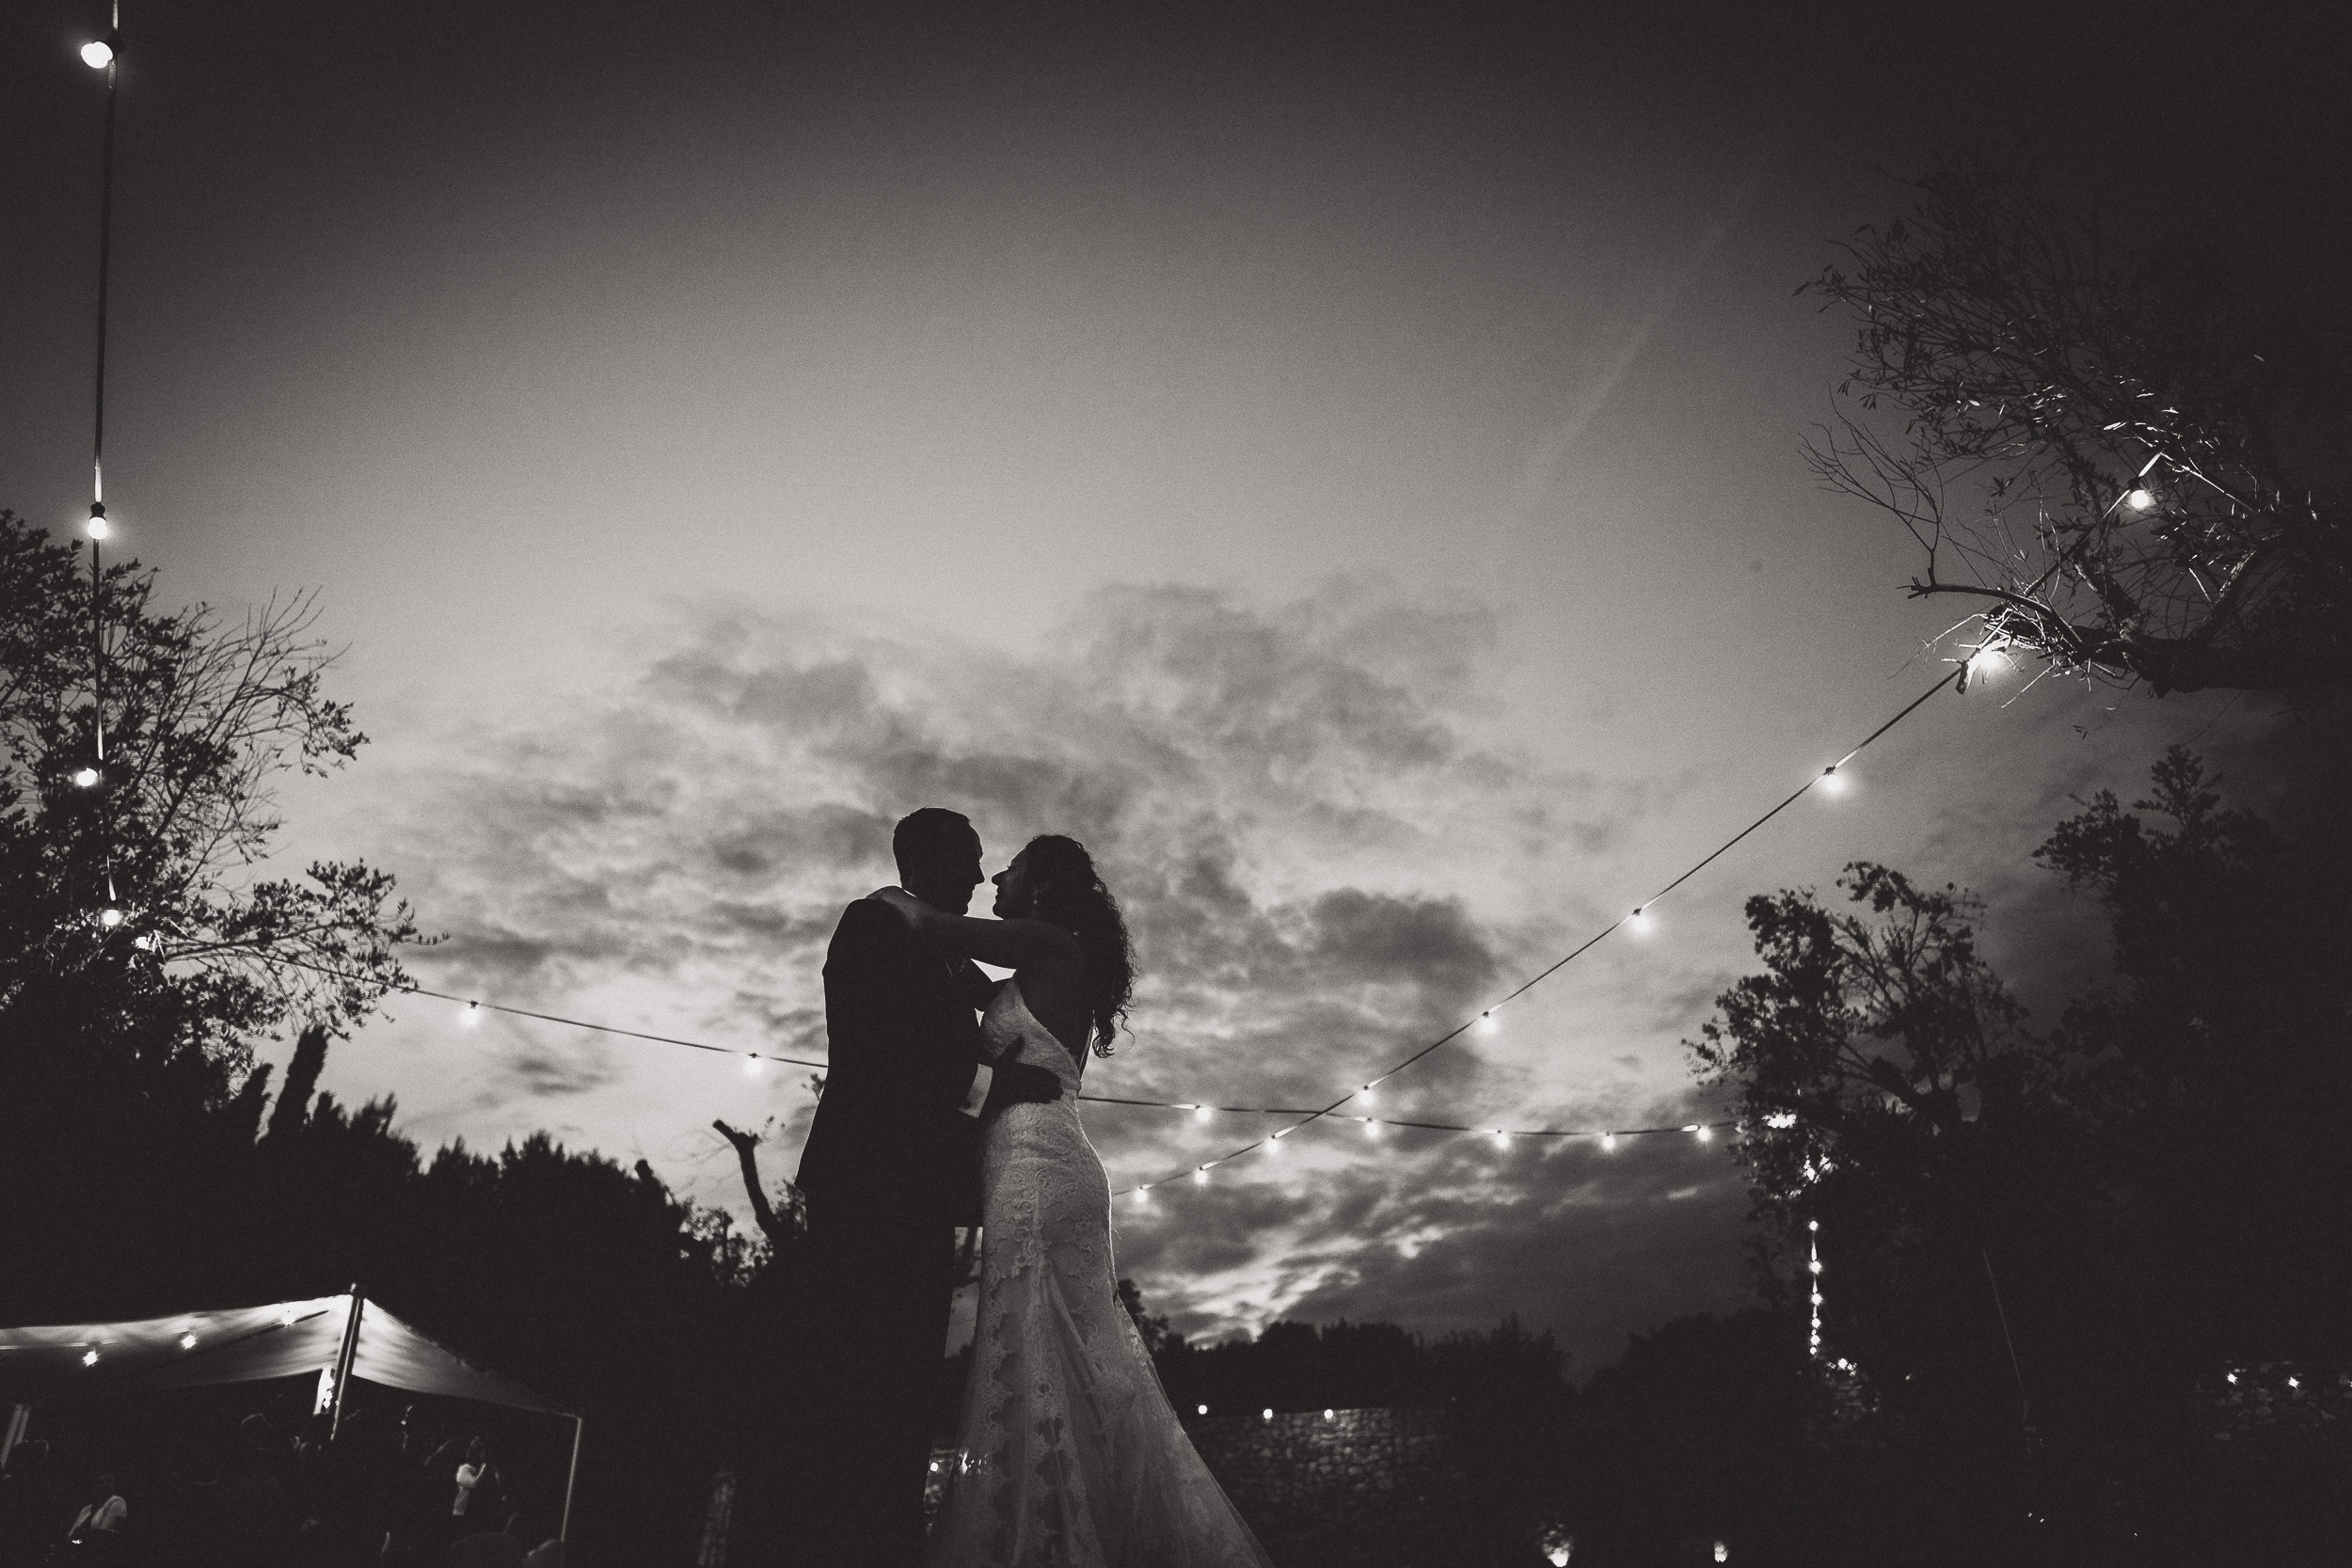 A groom and bride captured in a romantic wedding photo under sparkling string lights.